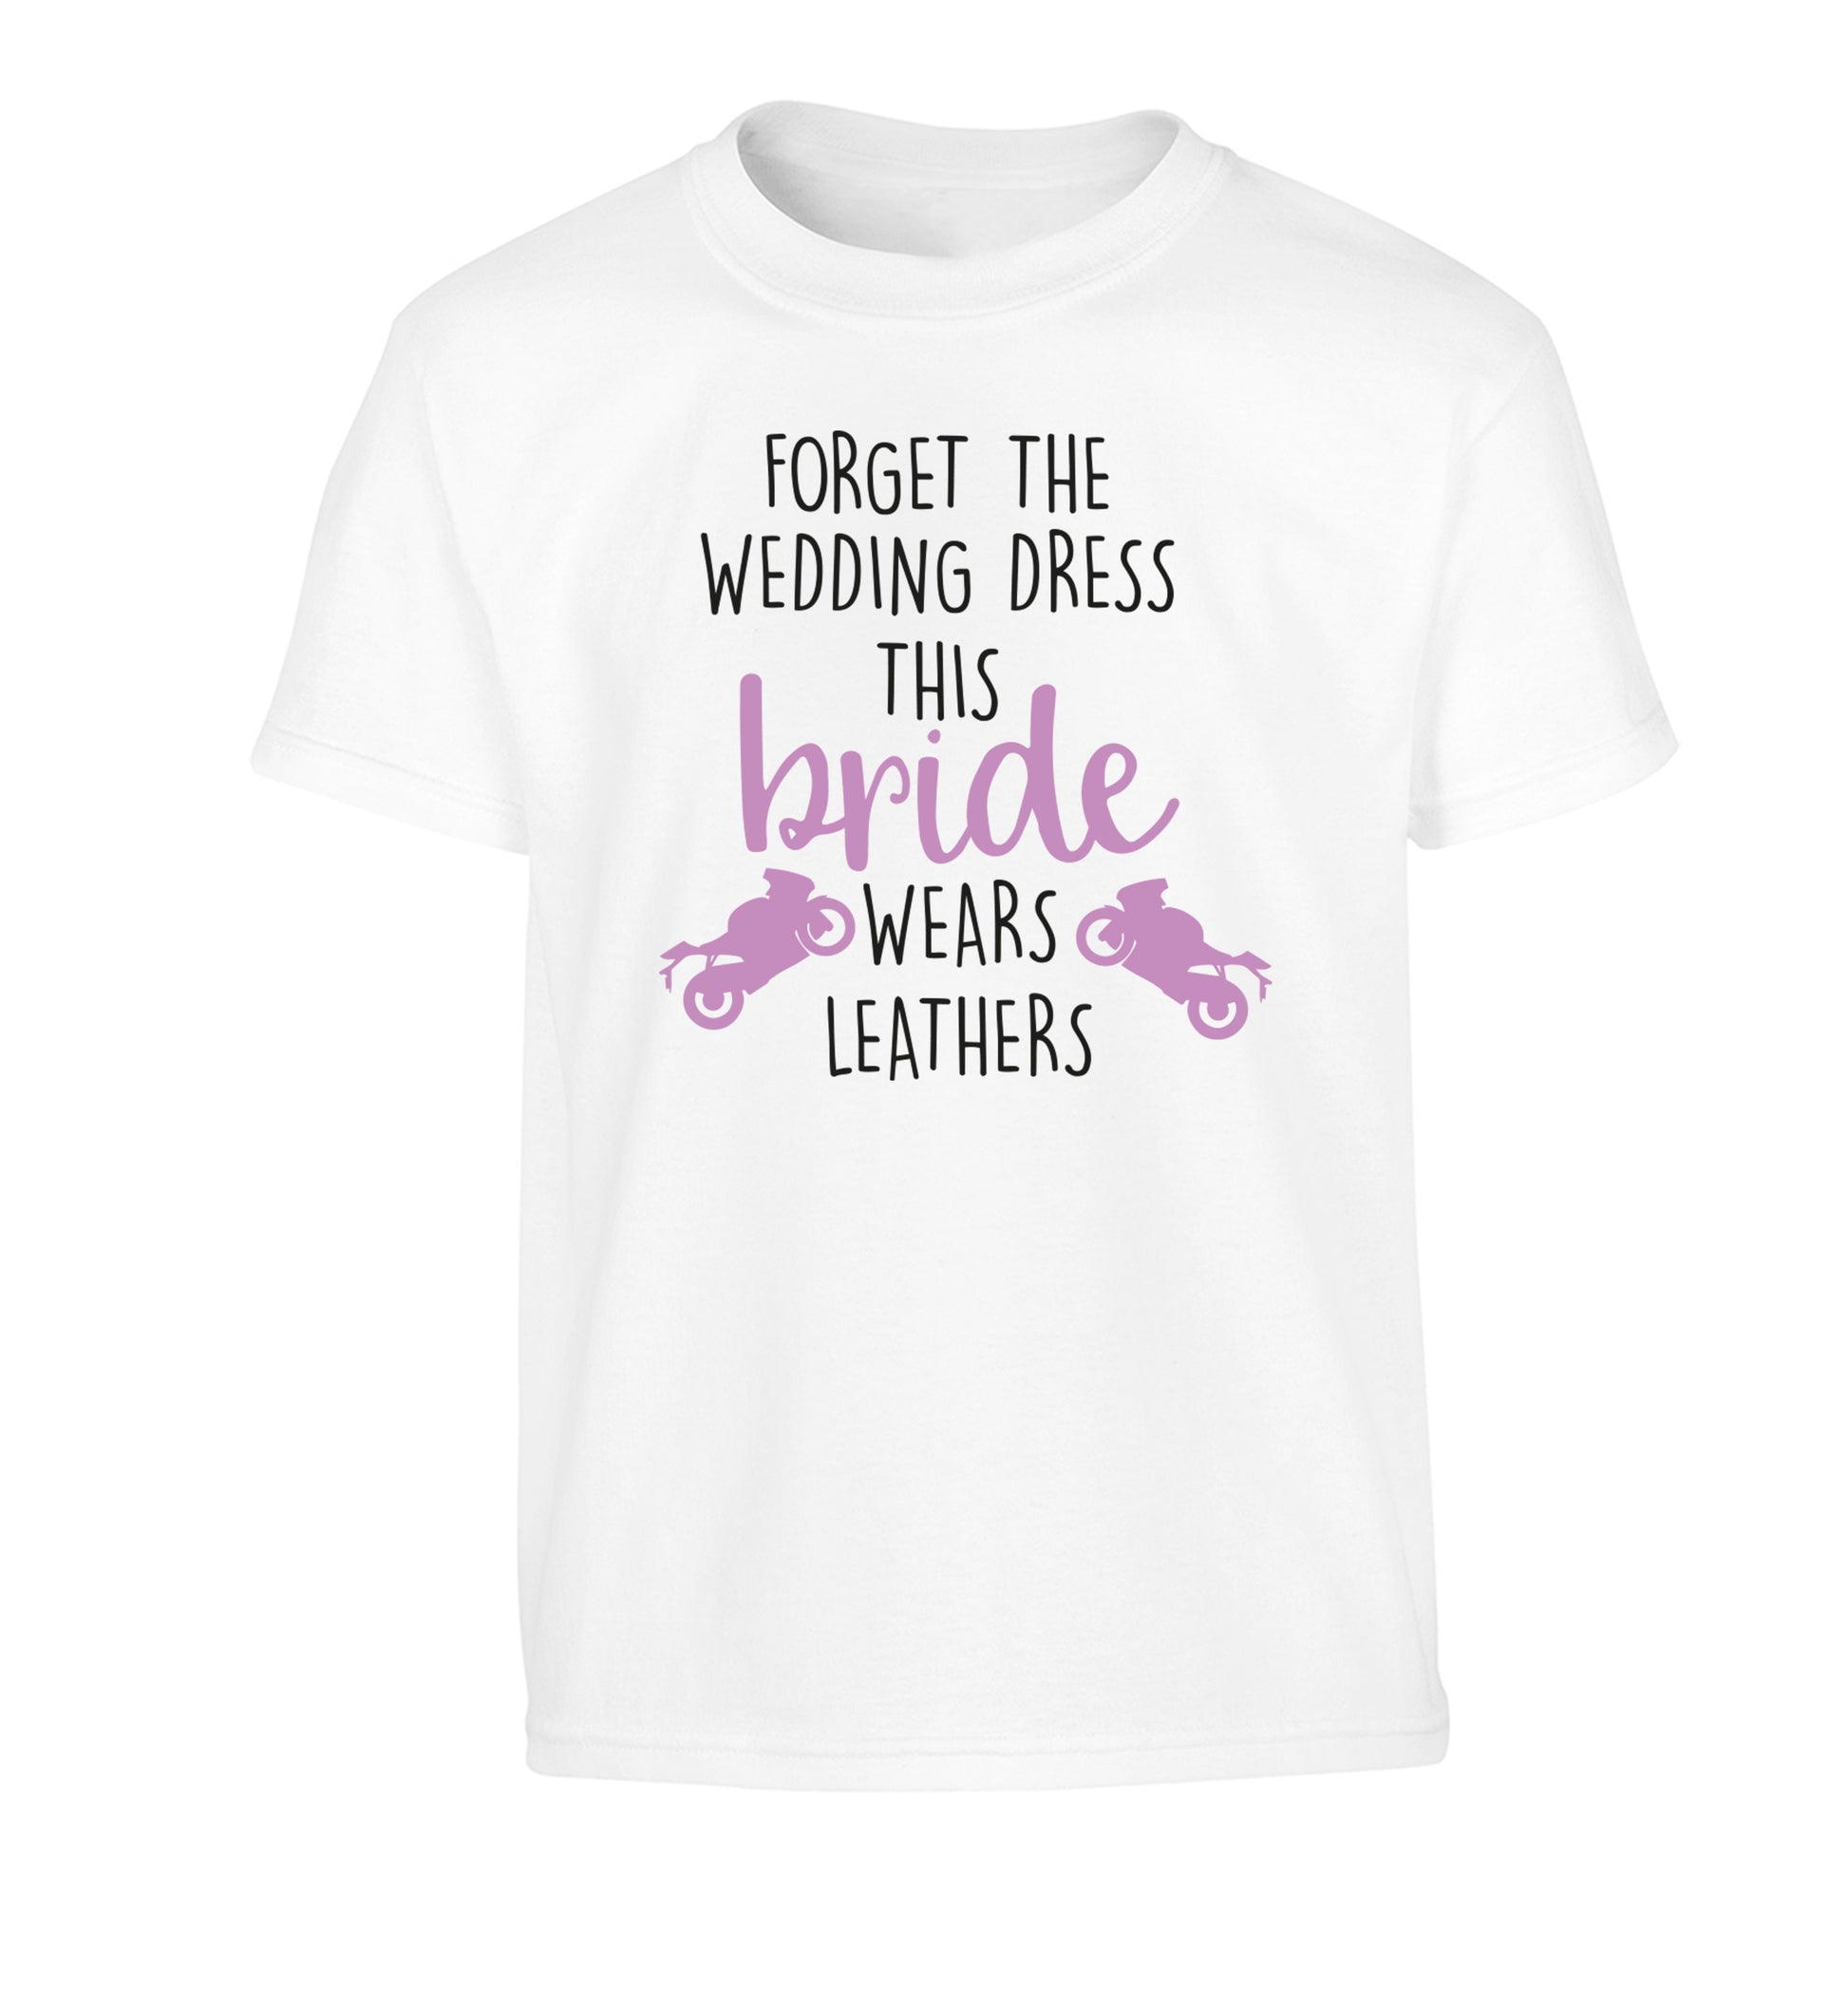 Forget the wedding dress this bride wears leathers Children's white Tshirt 12-13 Years